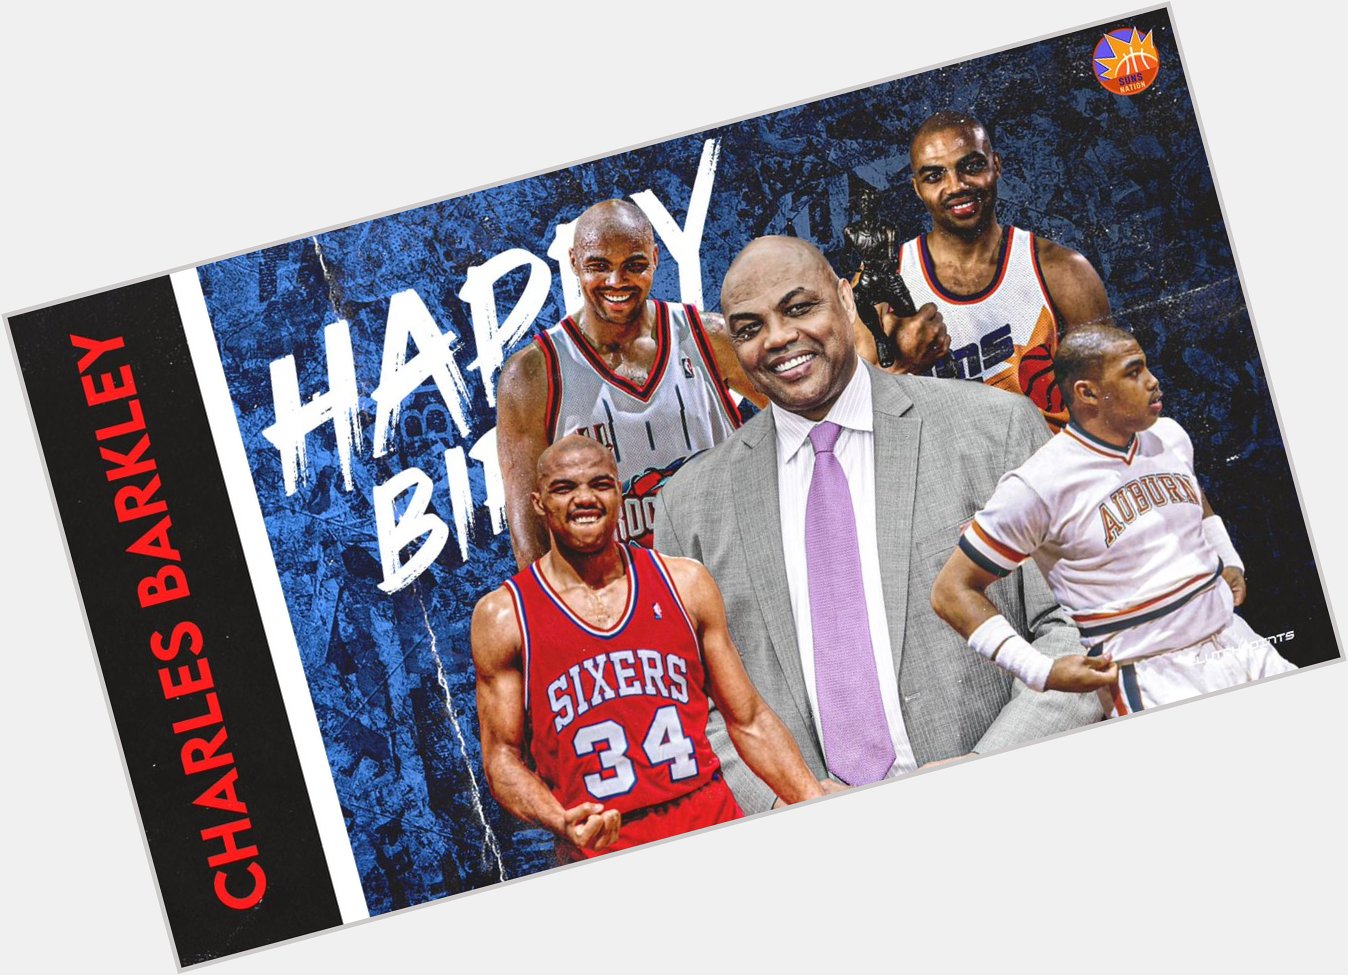 Join us  in greeting Charles Barkley a happy 58th birthday! 